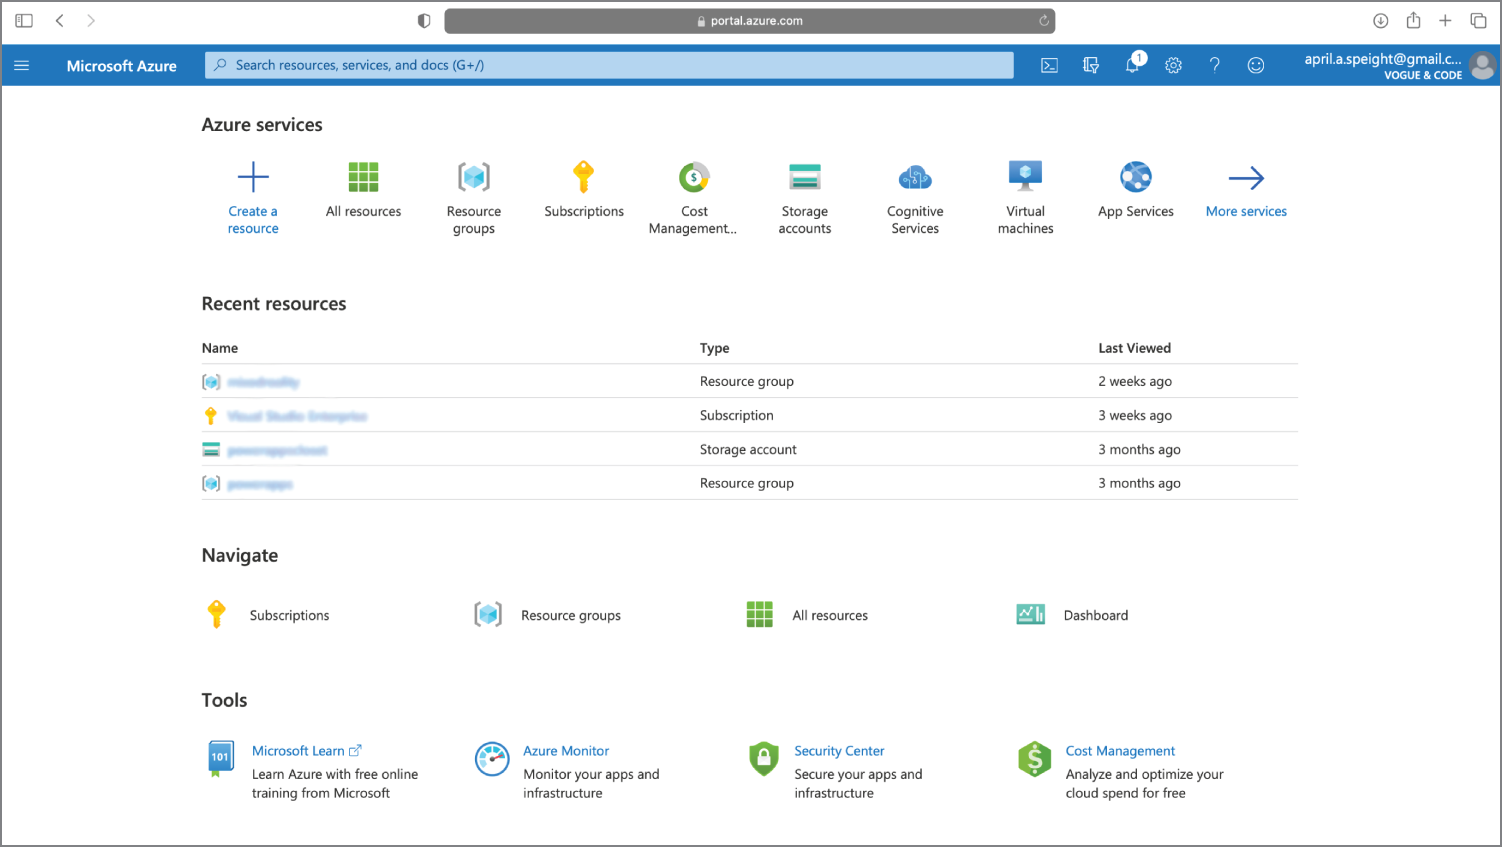 Snapshot of the home page for the Azure Portal.